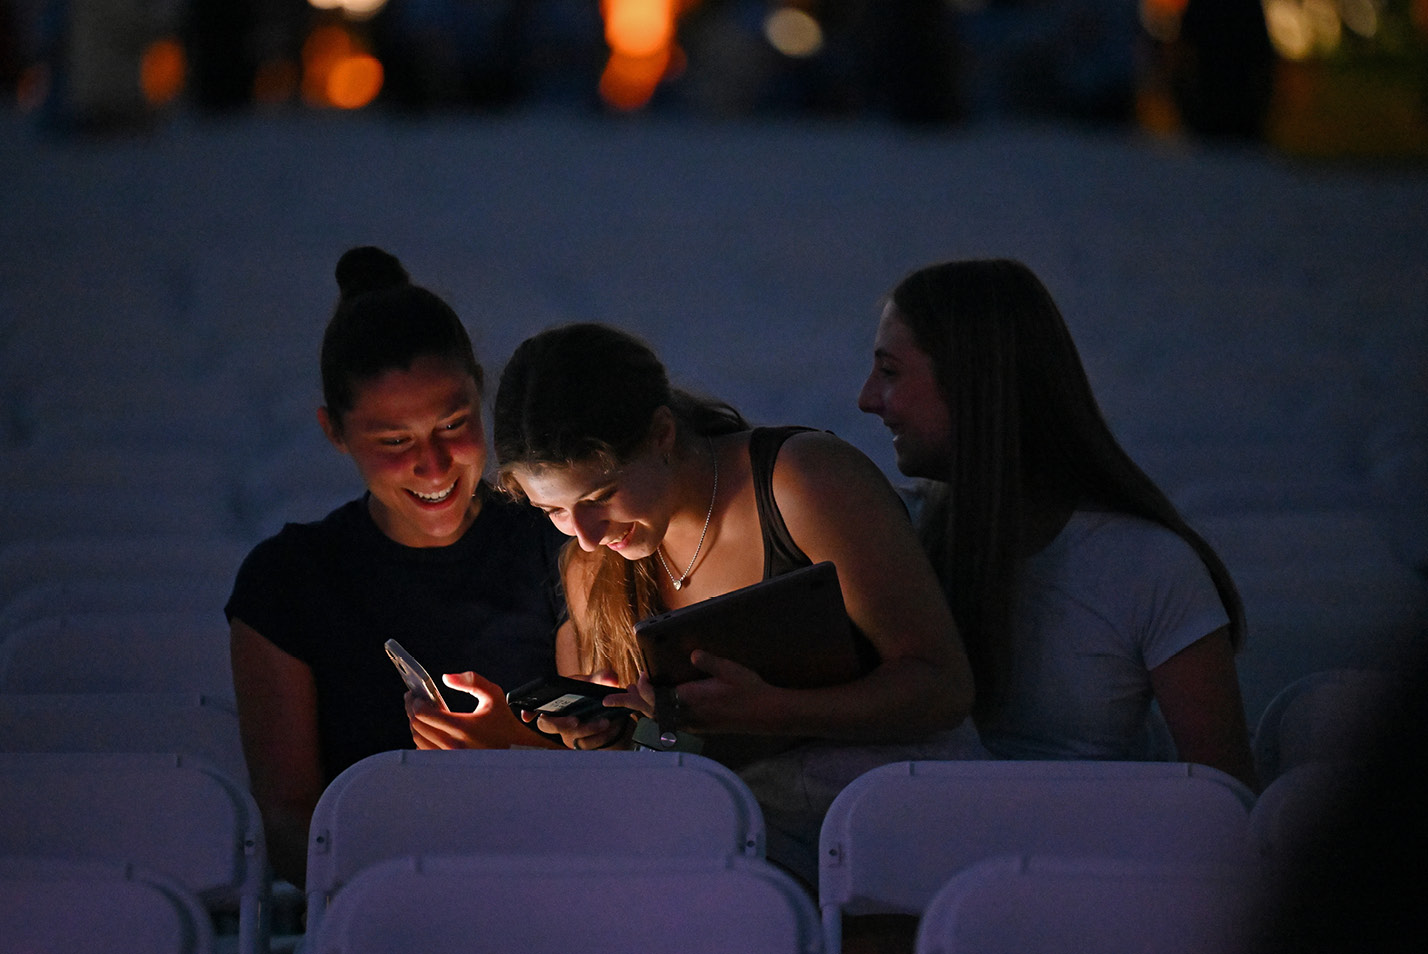 Three students in the dark looking at a cell phone